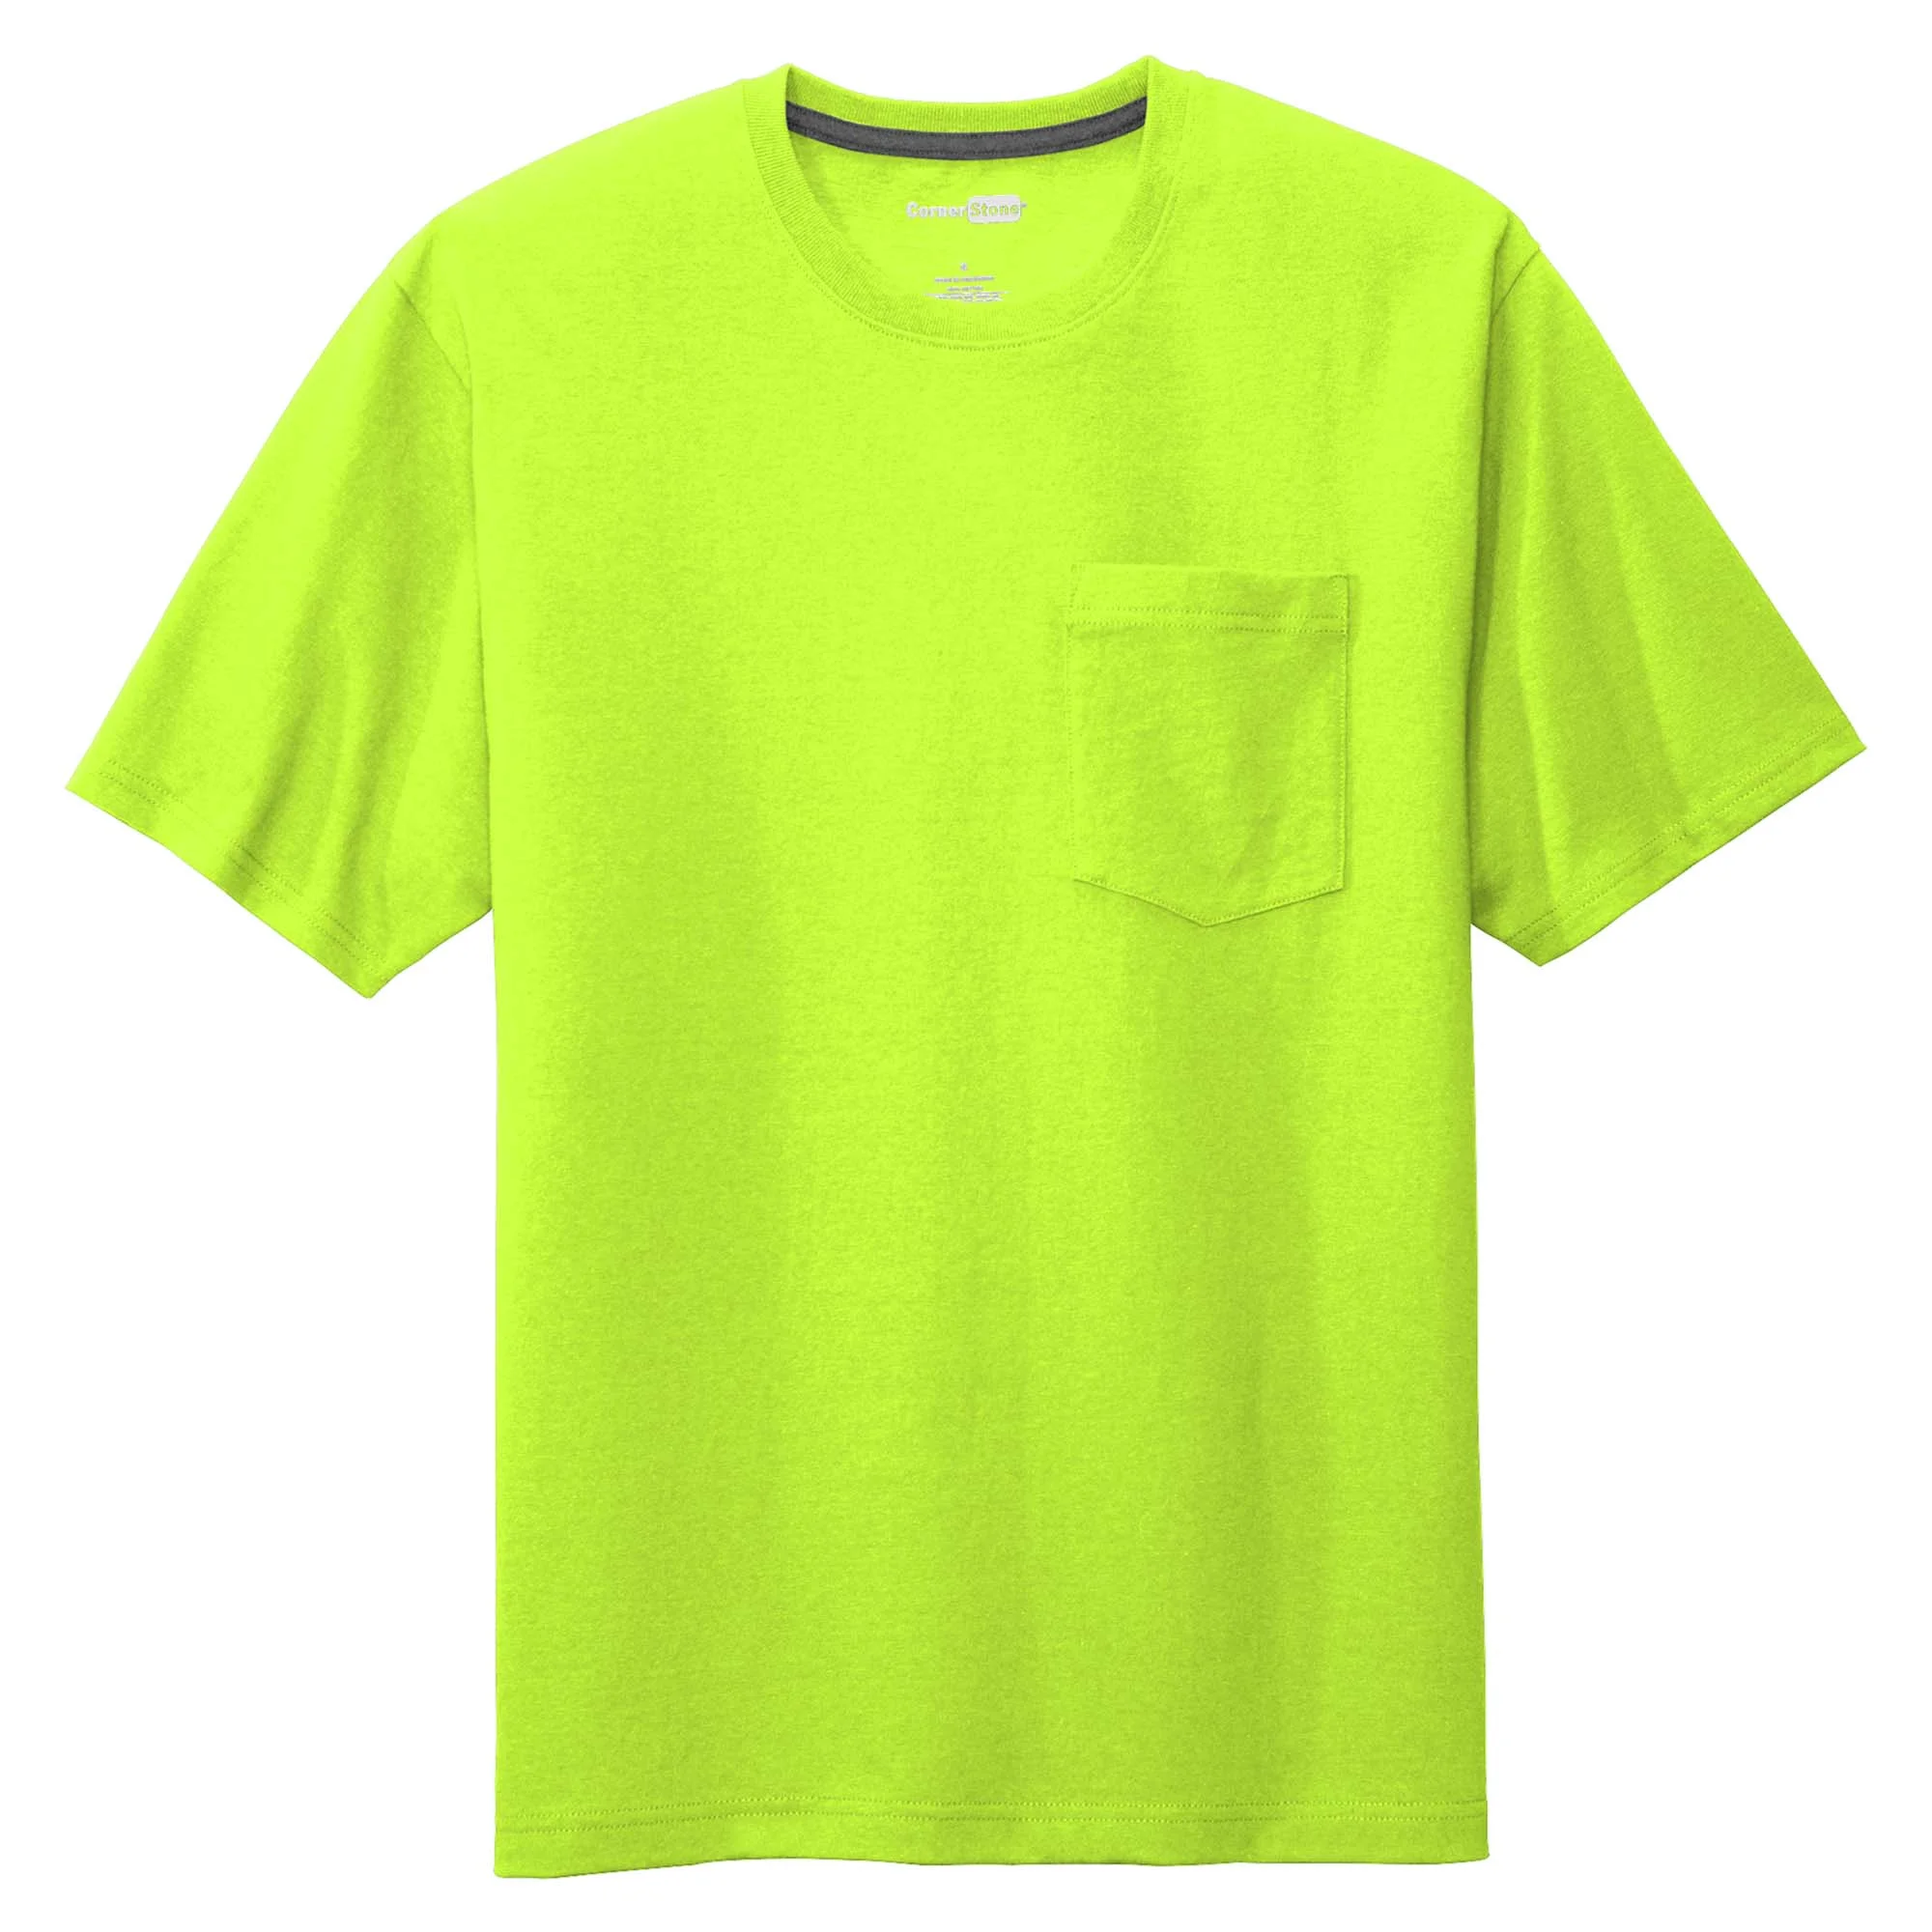 Wholesale Workwear Safety Green Pocket Tee Shirt Manufacturers In Bangladesh Factory Supplier